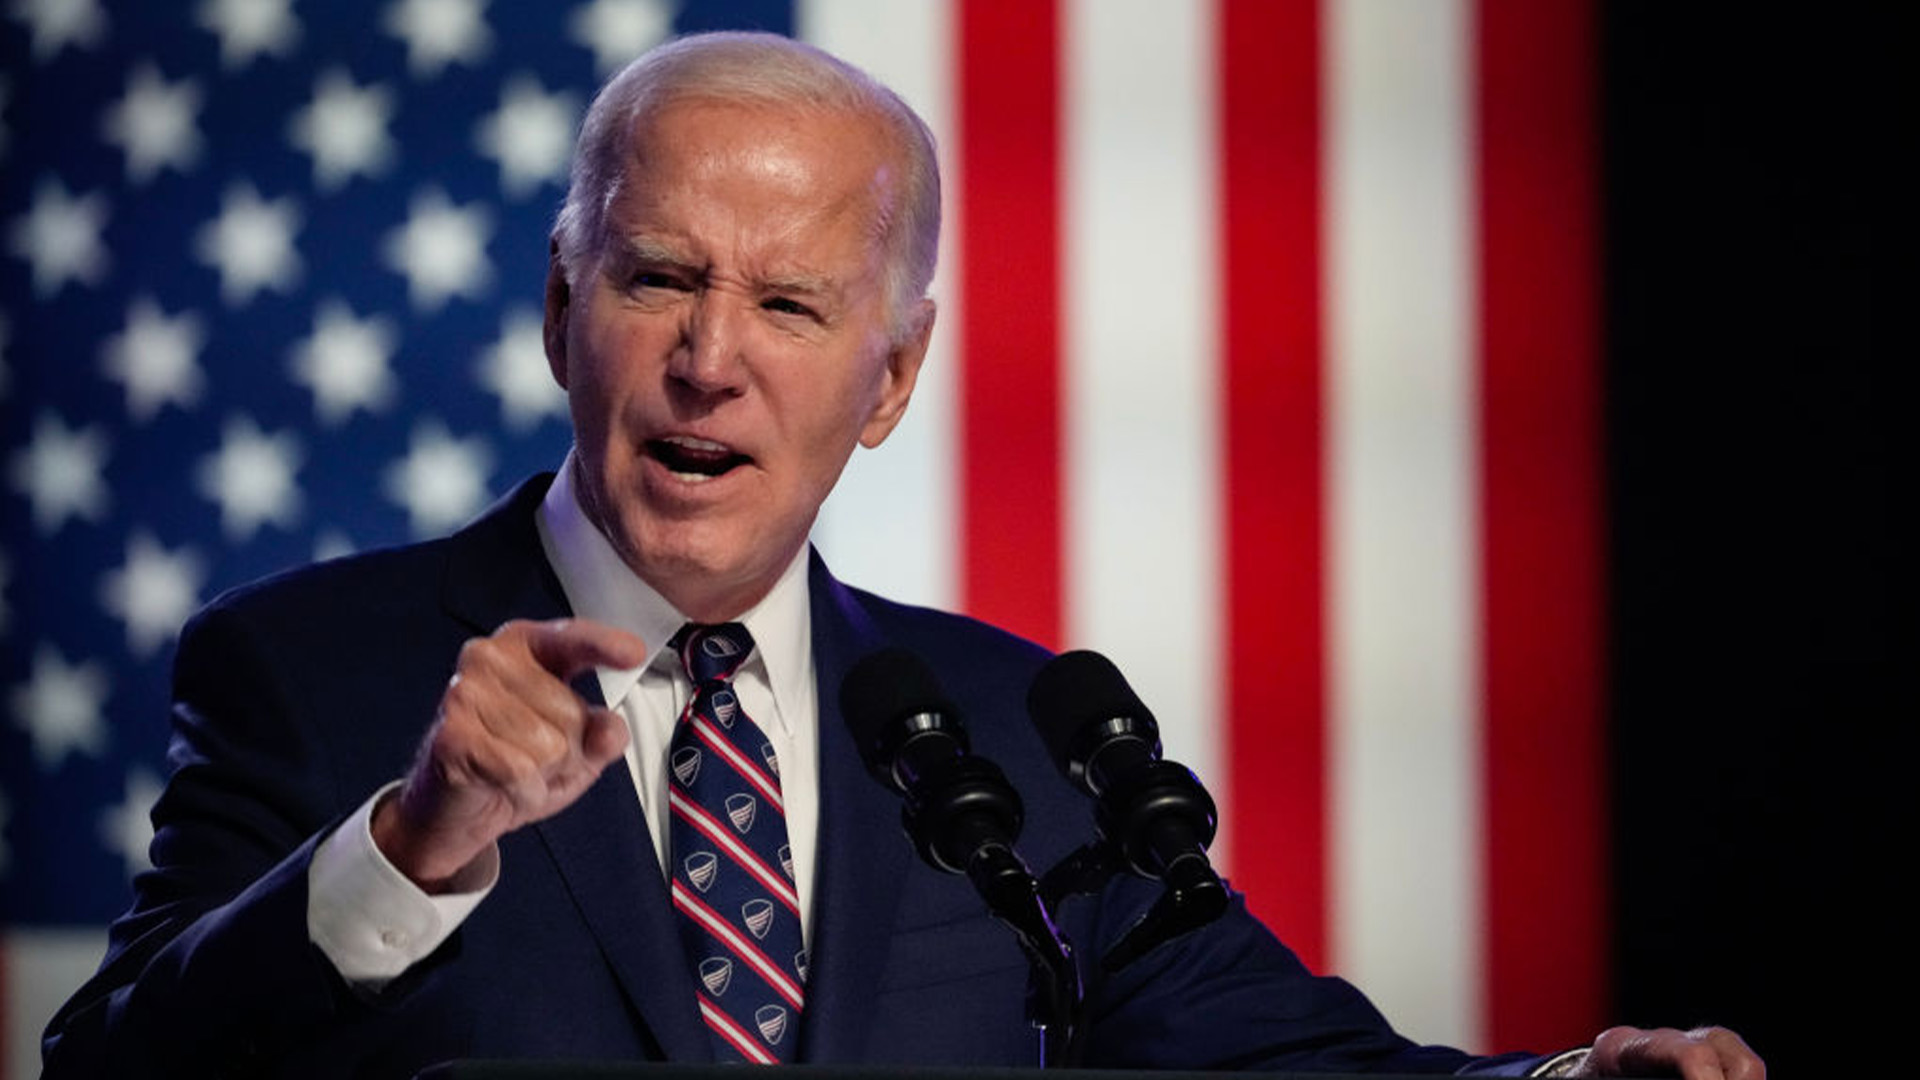 The Biden Administration To Clear $5B In Student Loan Debt For An Additional 74,000 American Borrowers